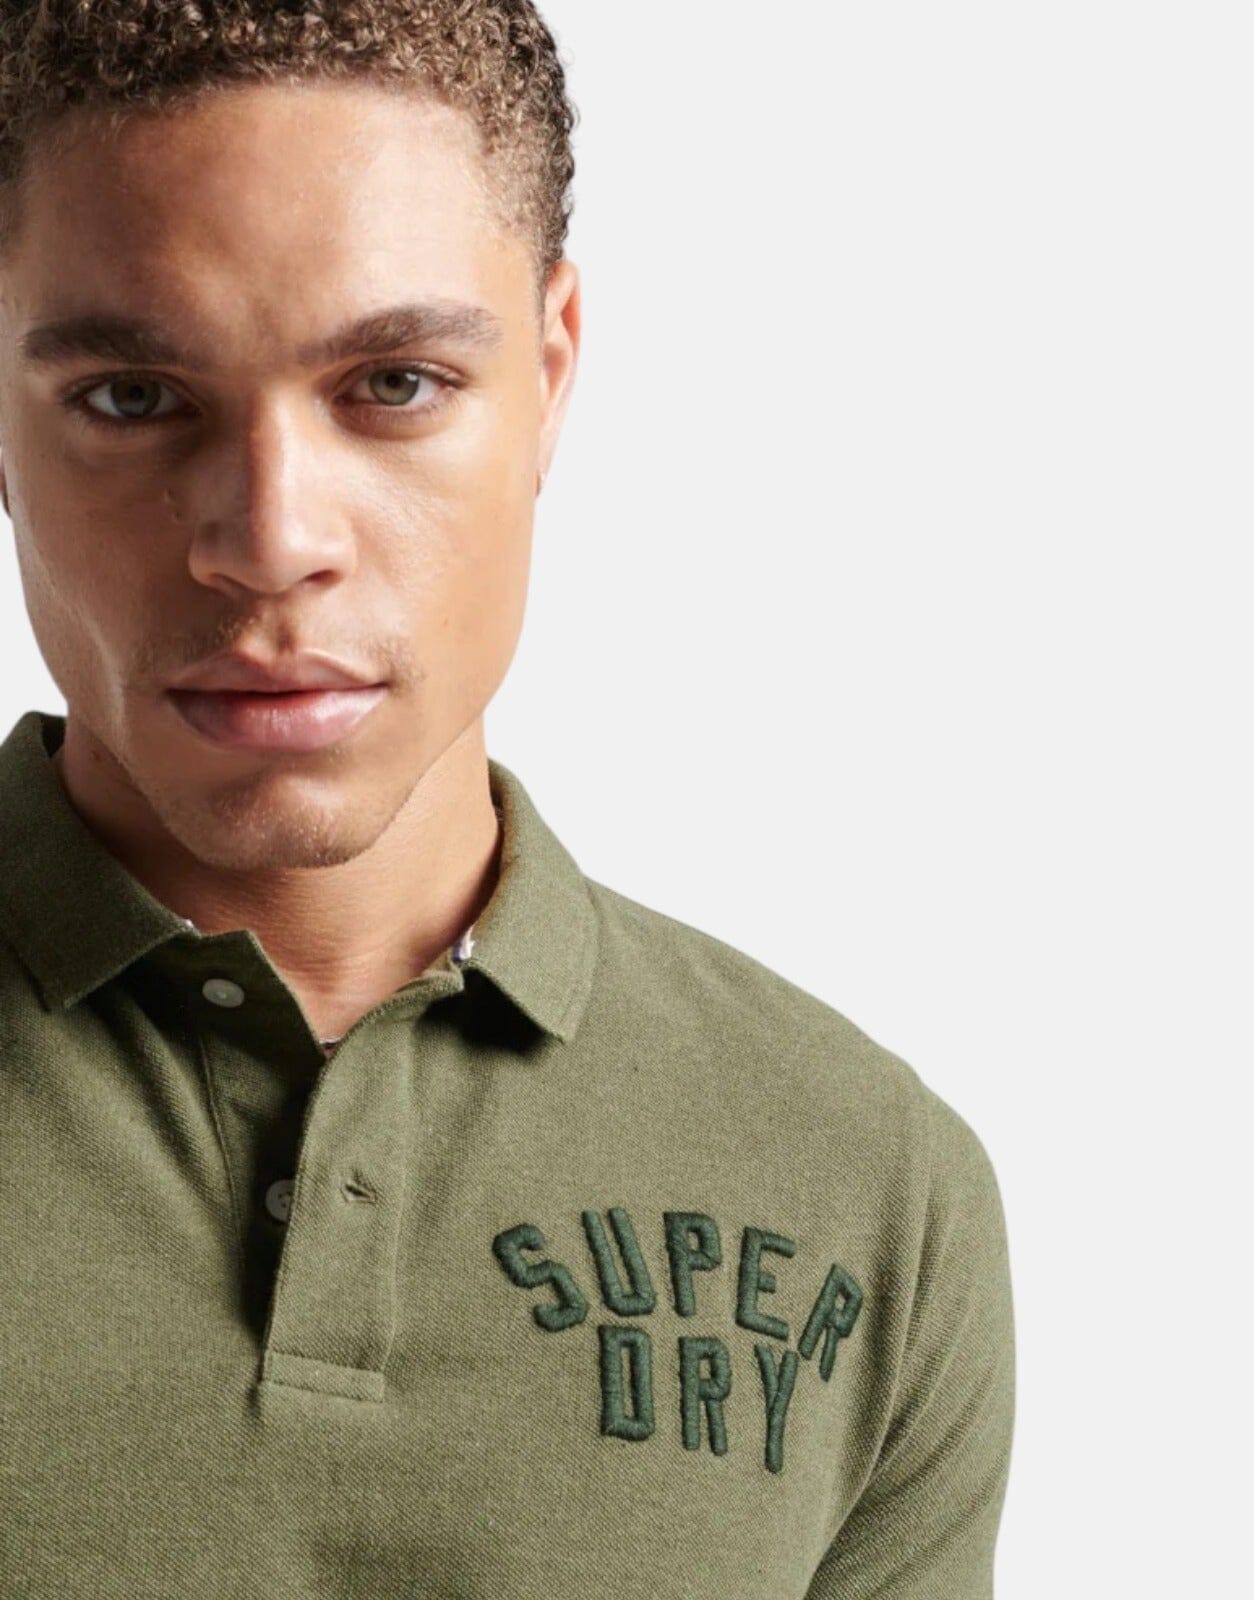 Superdry Superstate Polo Shirt - Subwear